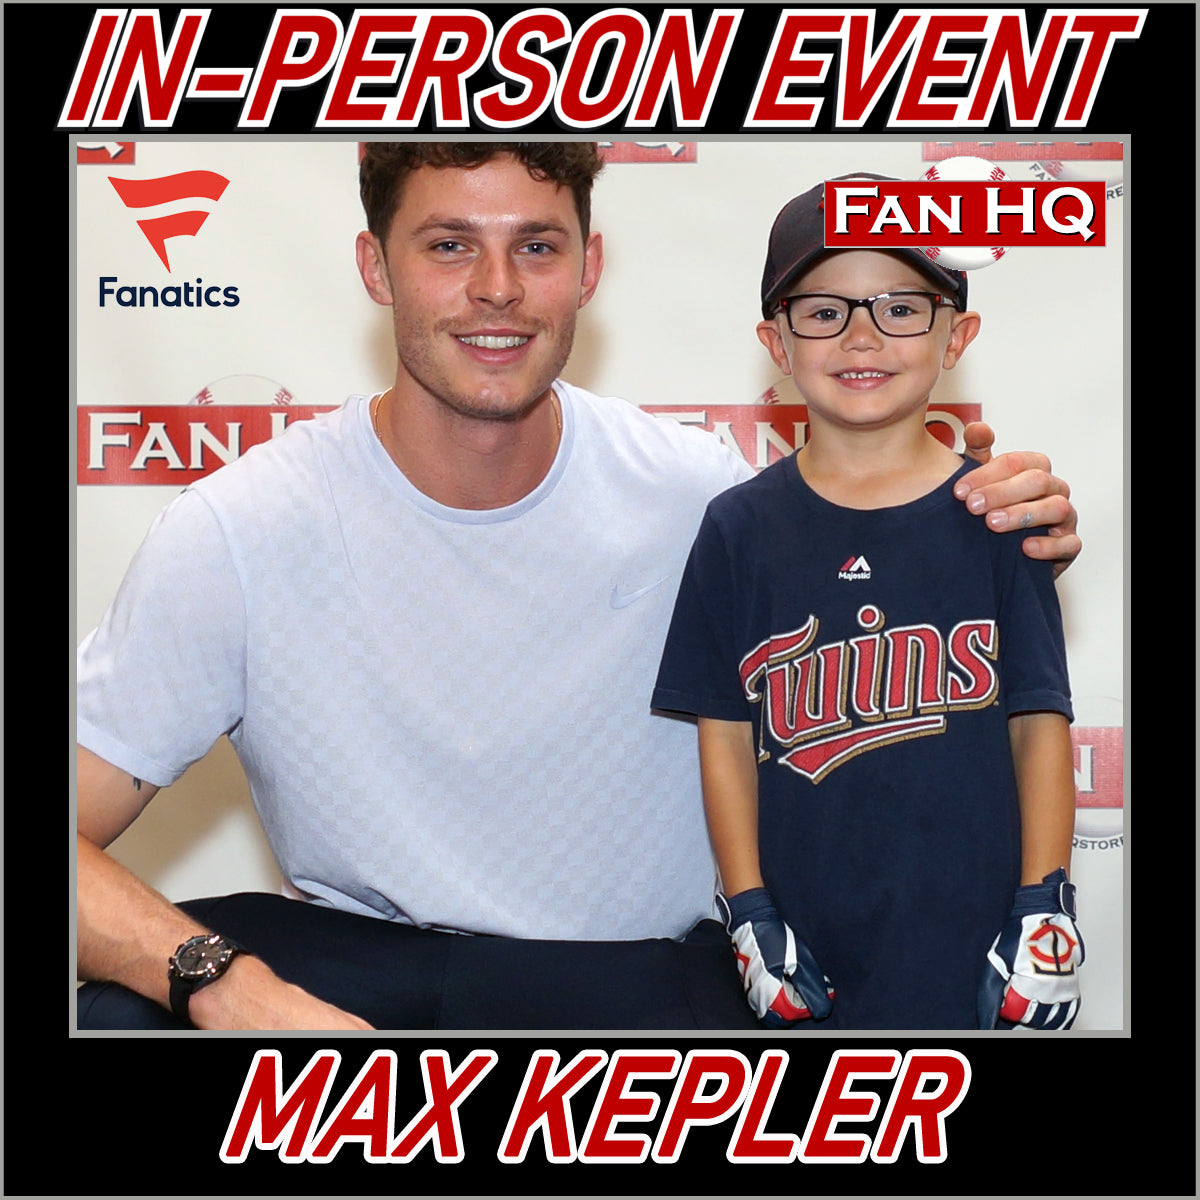 2015 Minnesota Twins Game-used and autographed Max Kepler jersey